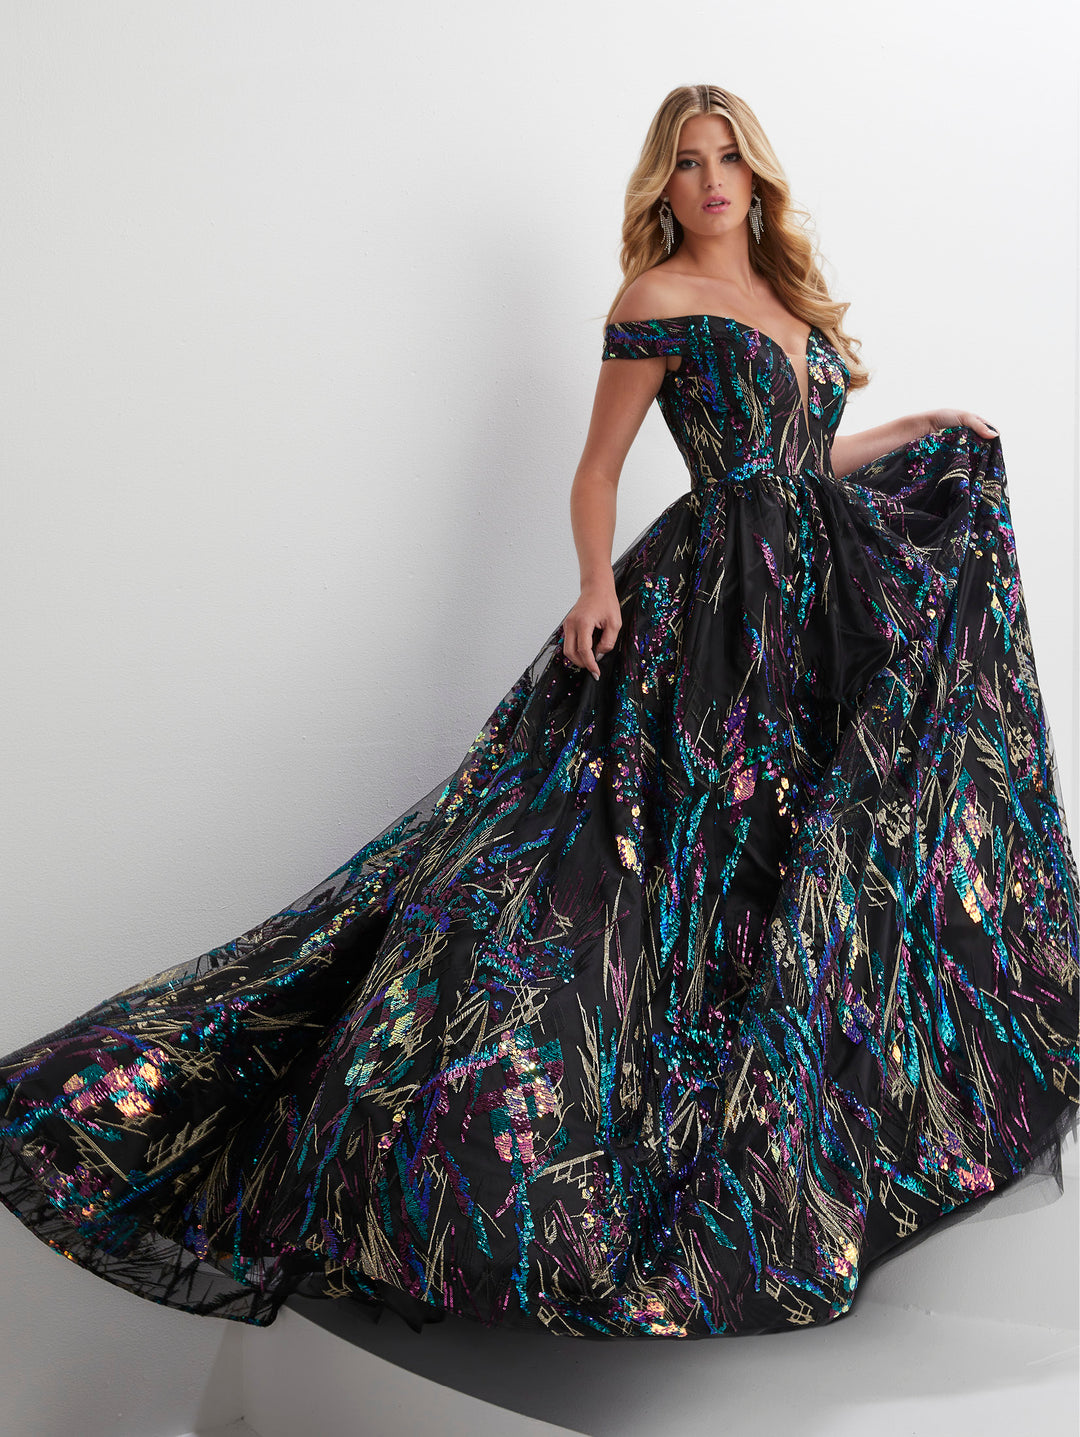 Sequin Print Off Shoulder A-line Gown by Panoply 14128